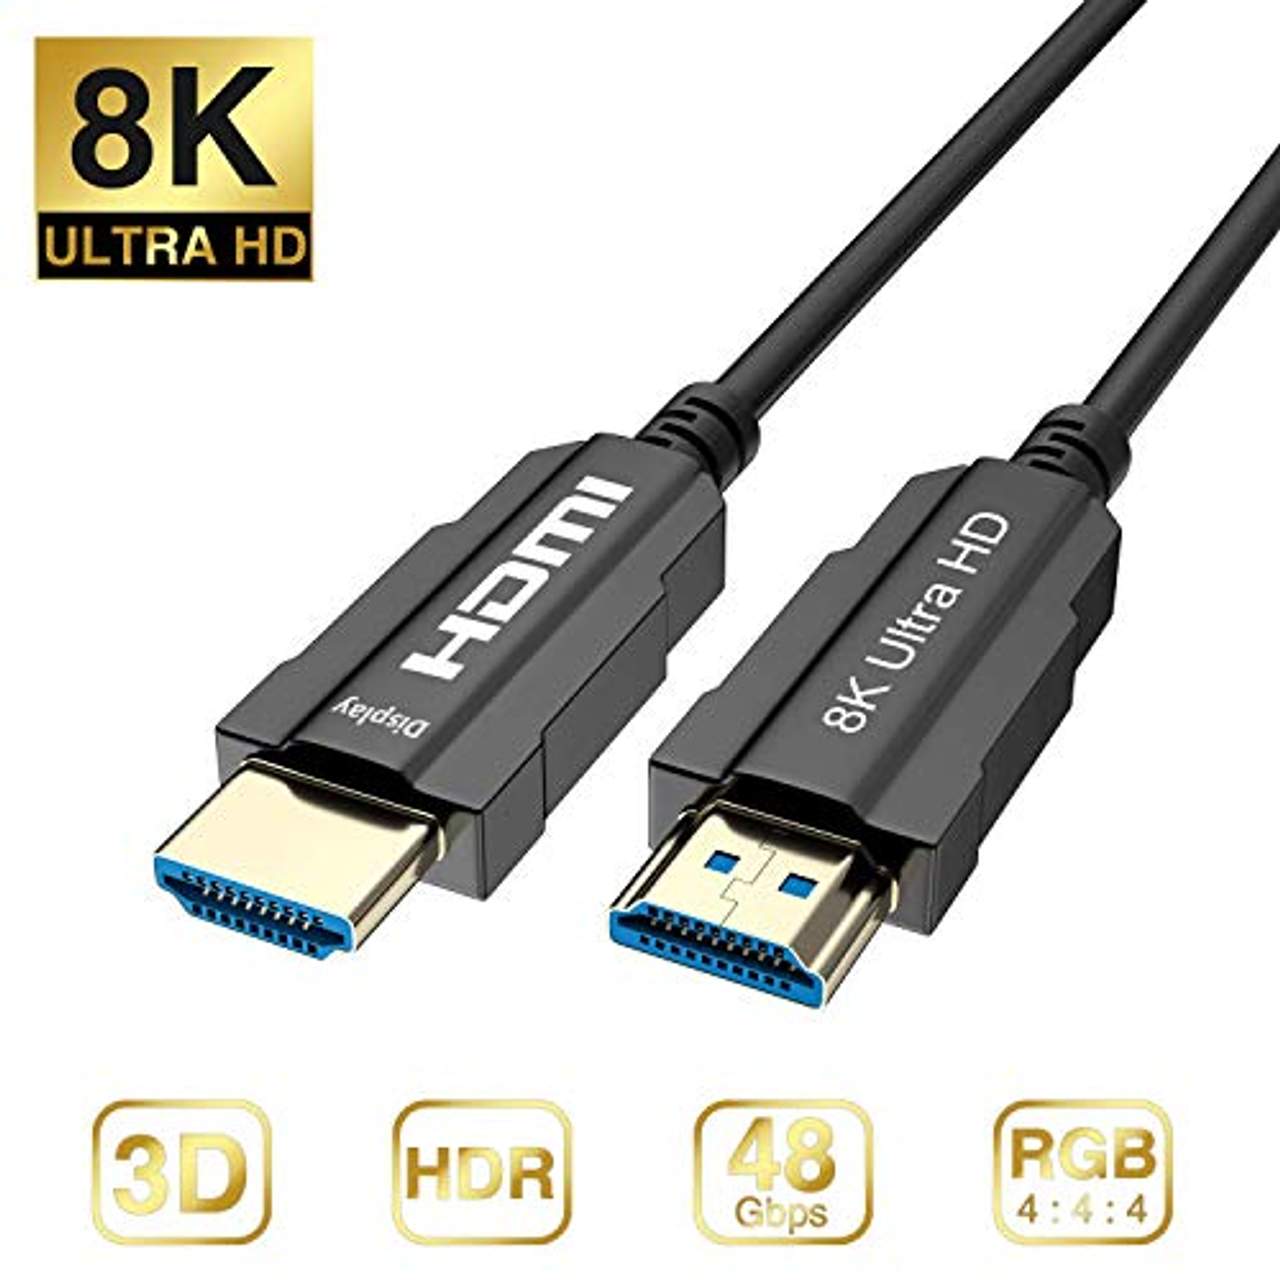 CABLEDECONN 8K Optic Hdmi Cable Real UHD HDR 8K 48Gbps 8K@60Hz 4K@120Hz Hdmi